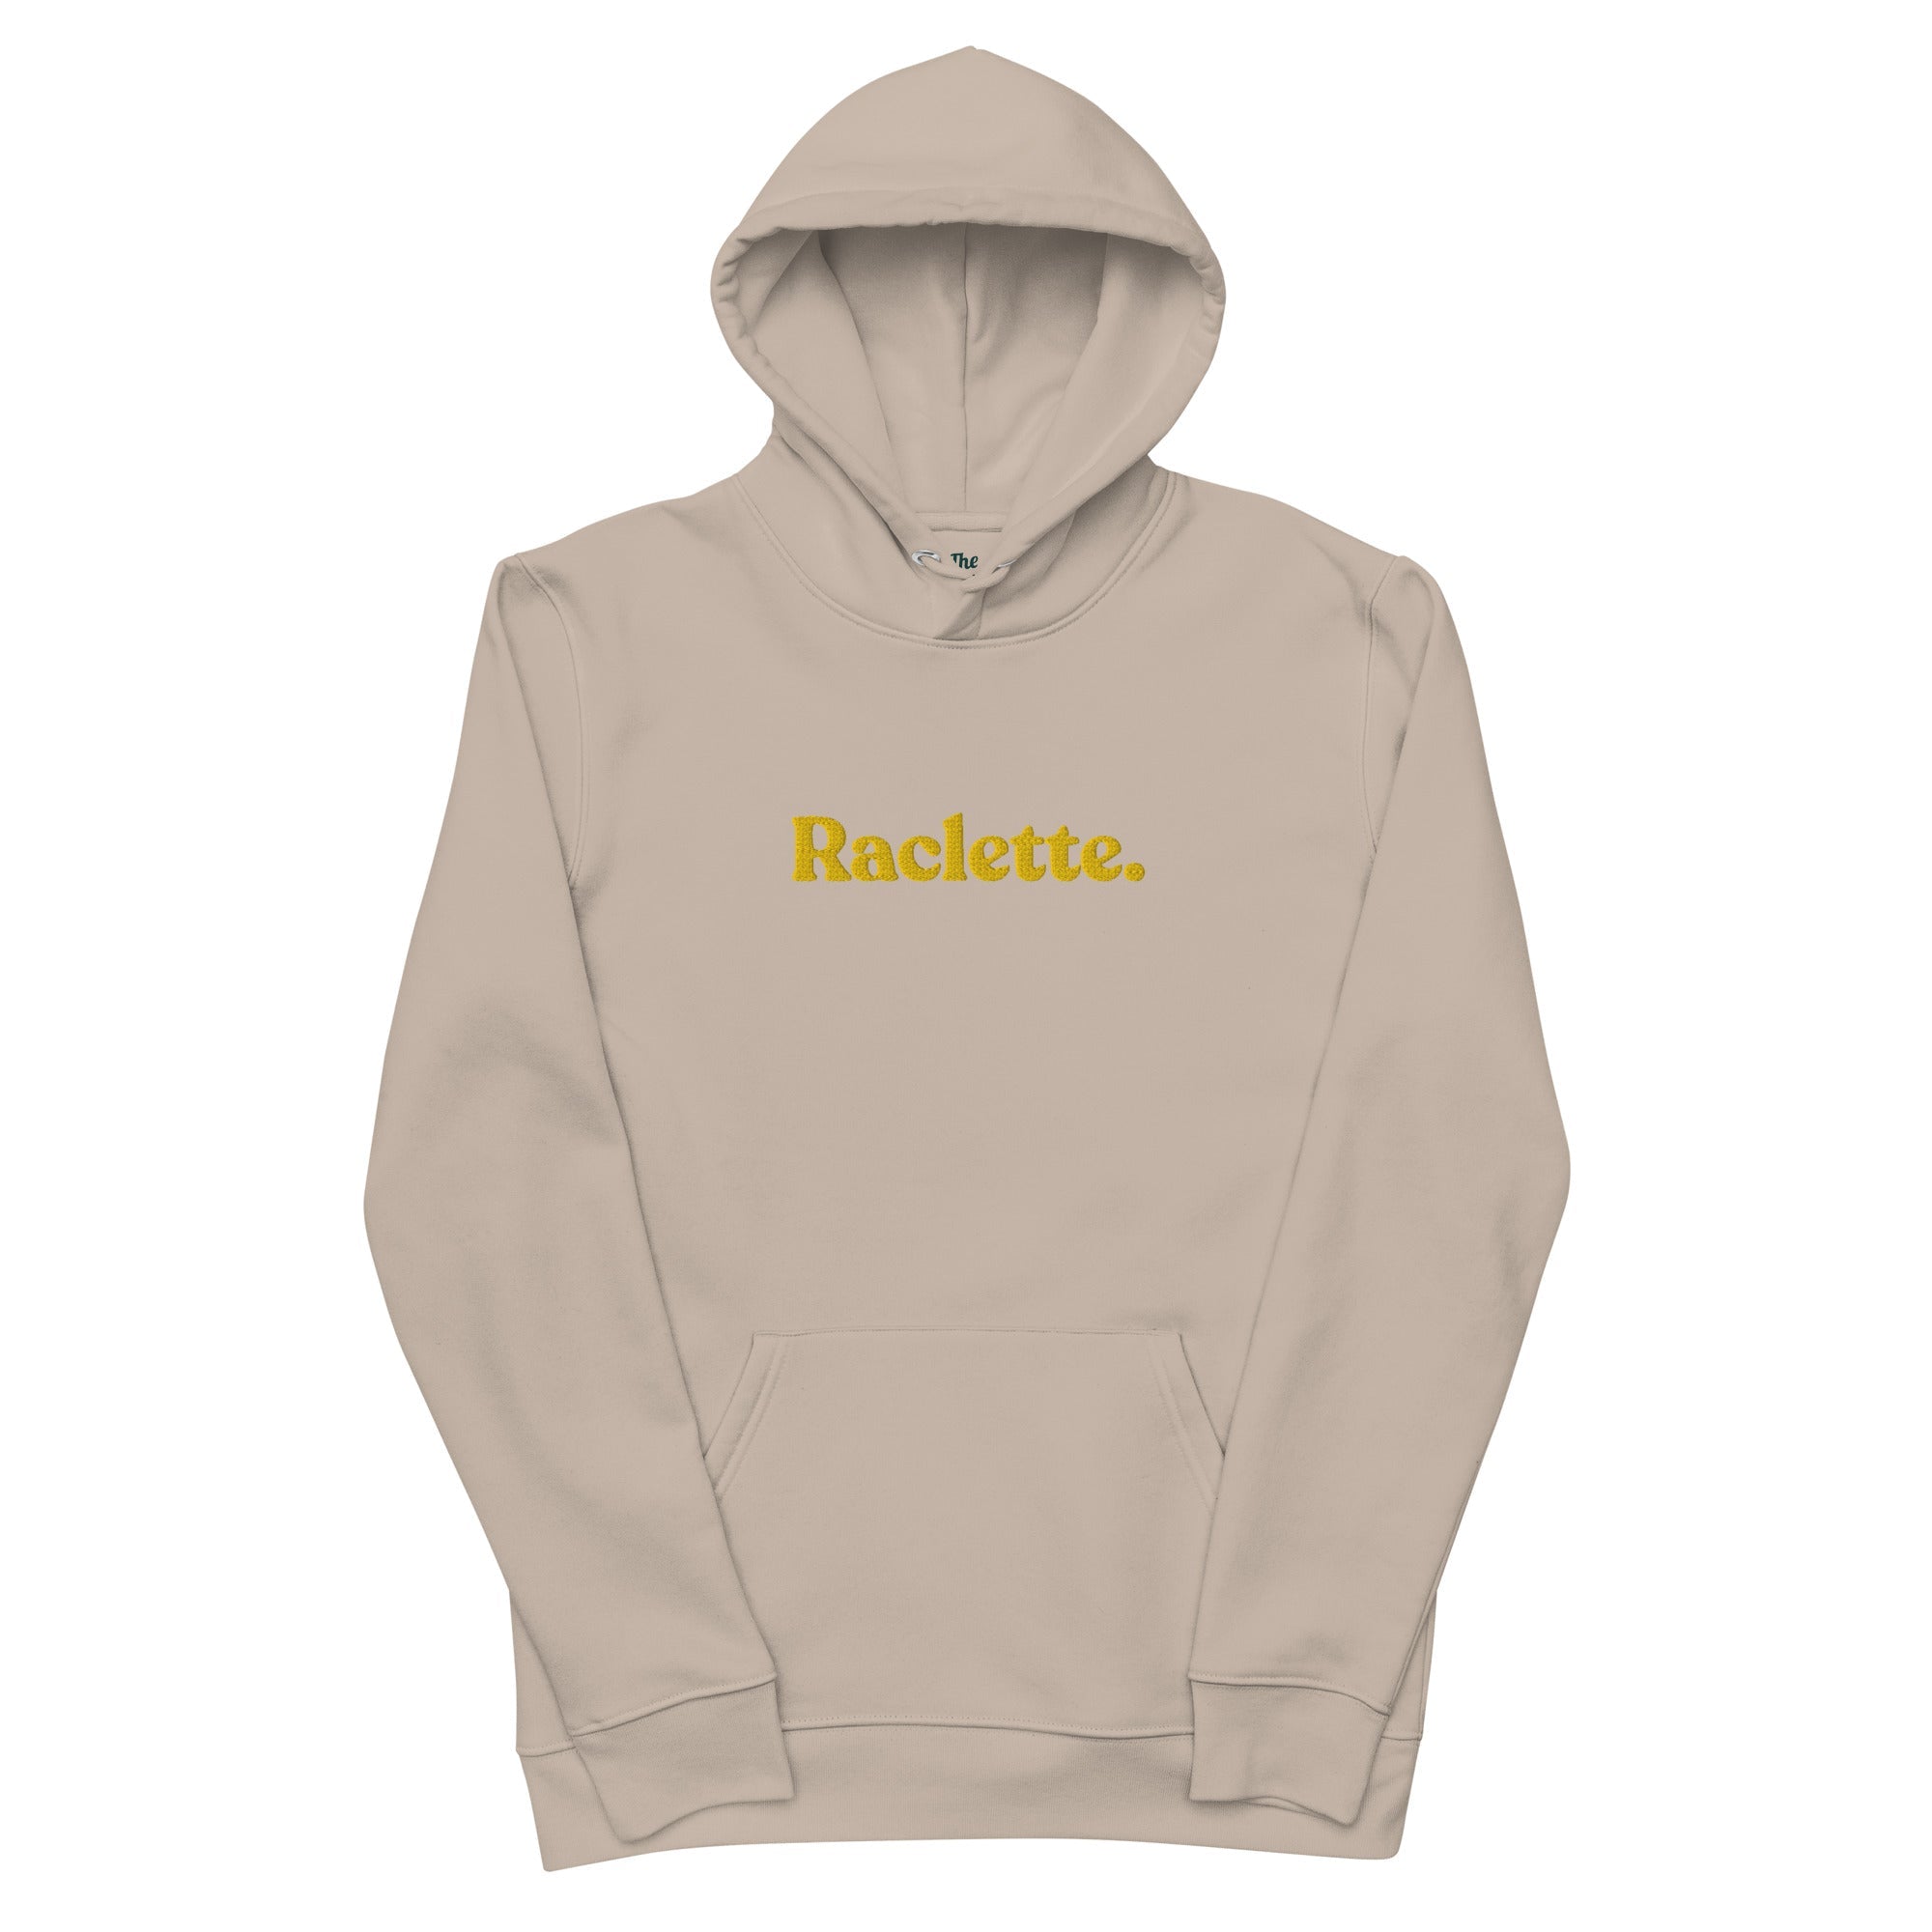 Raclette - Organic Embroidered Hoodie - The Refined Spirit